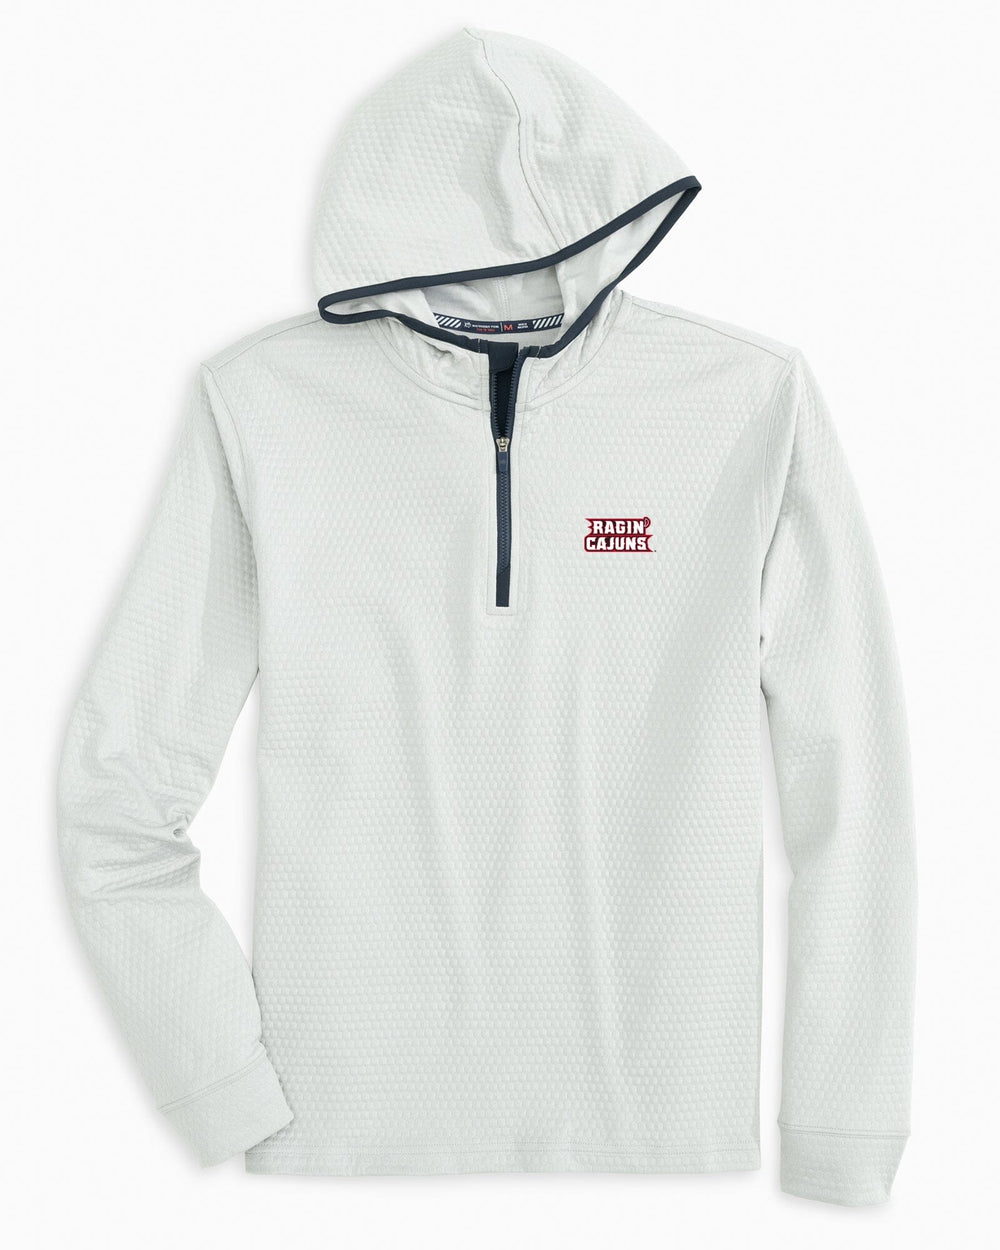 The front view of the University of Louisiana-Lafayette Scuttle Heather Quarter Zip Hoodie by Southern Tide - Heather Seagull Grey